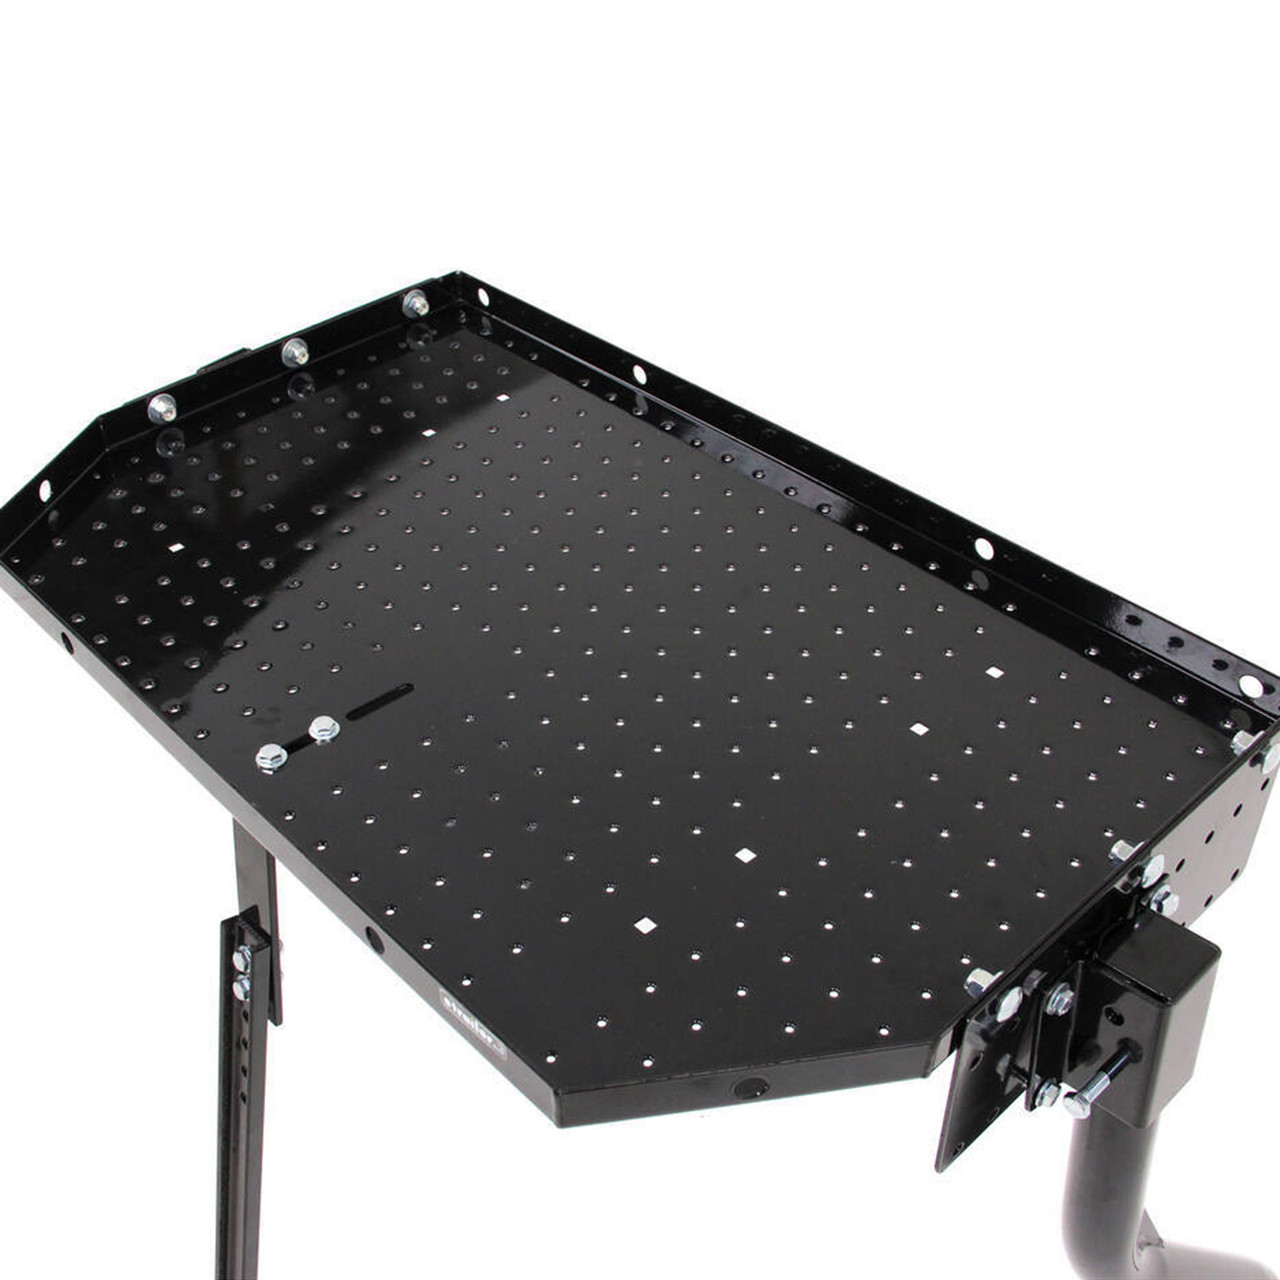 A-Frame Cargo Carrier For Outdoor and Generator Storage For RV Trailer Tray